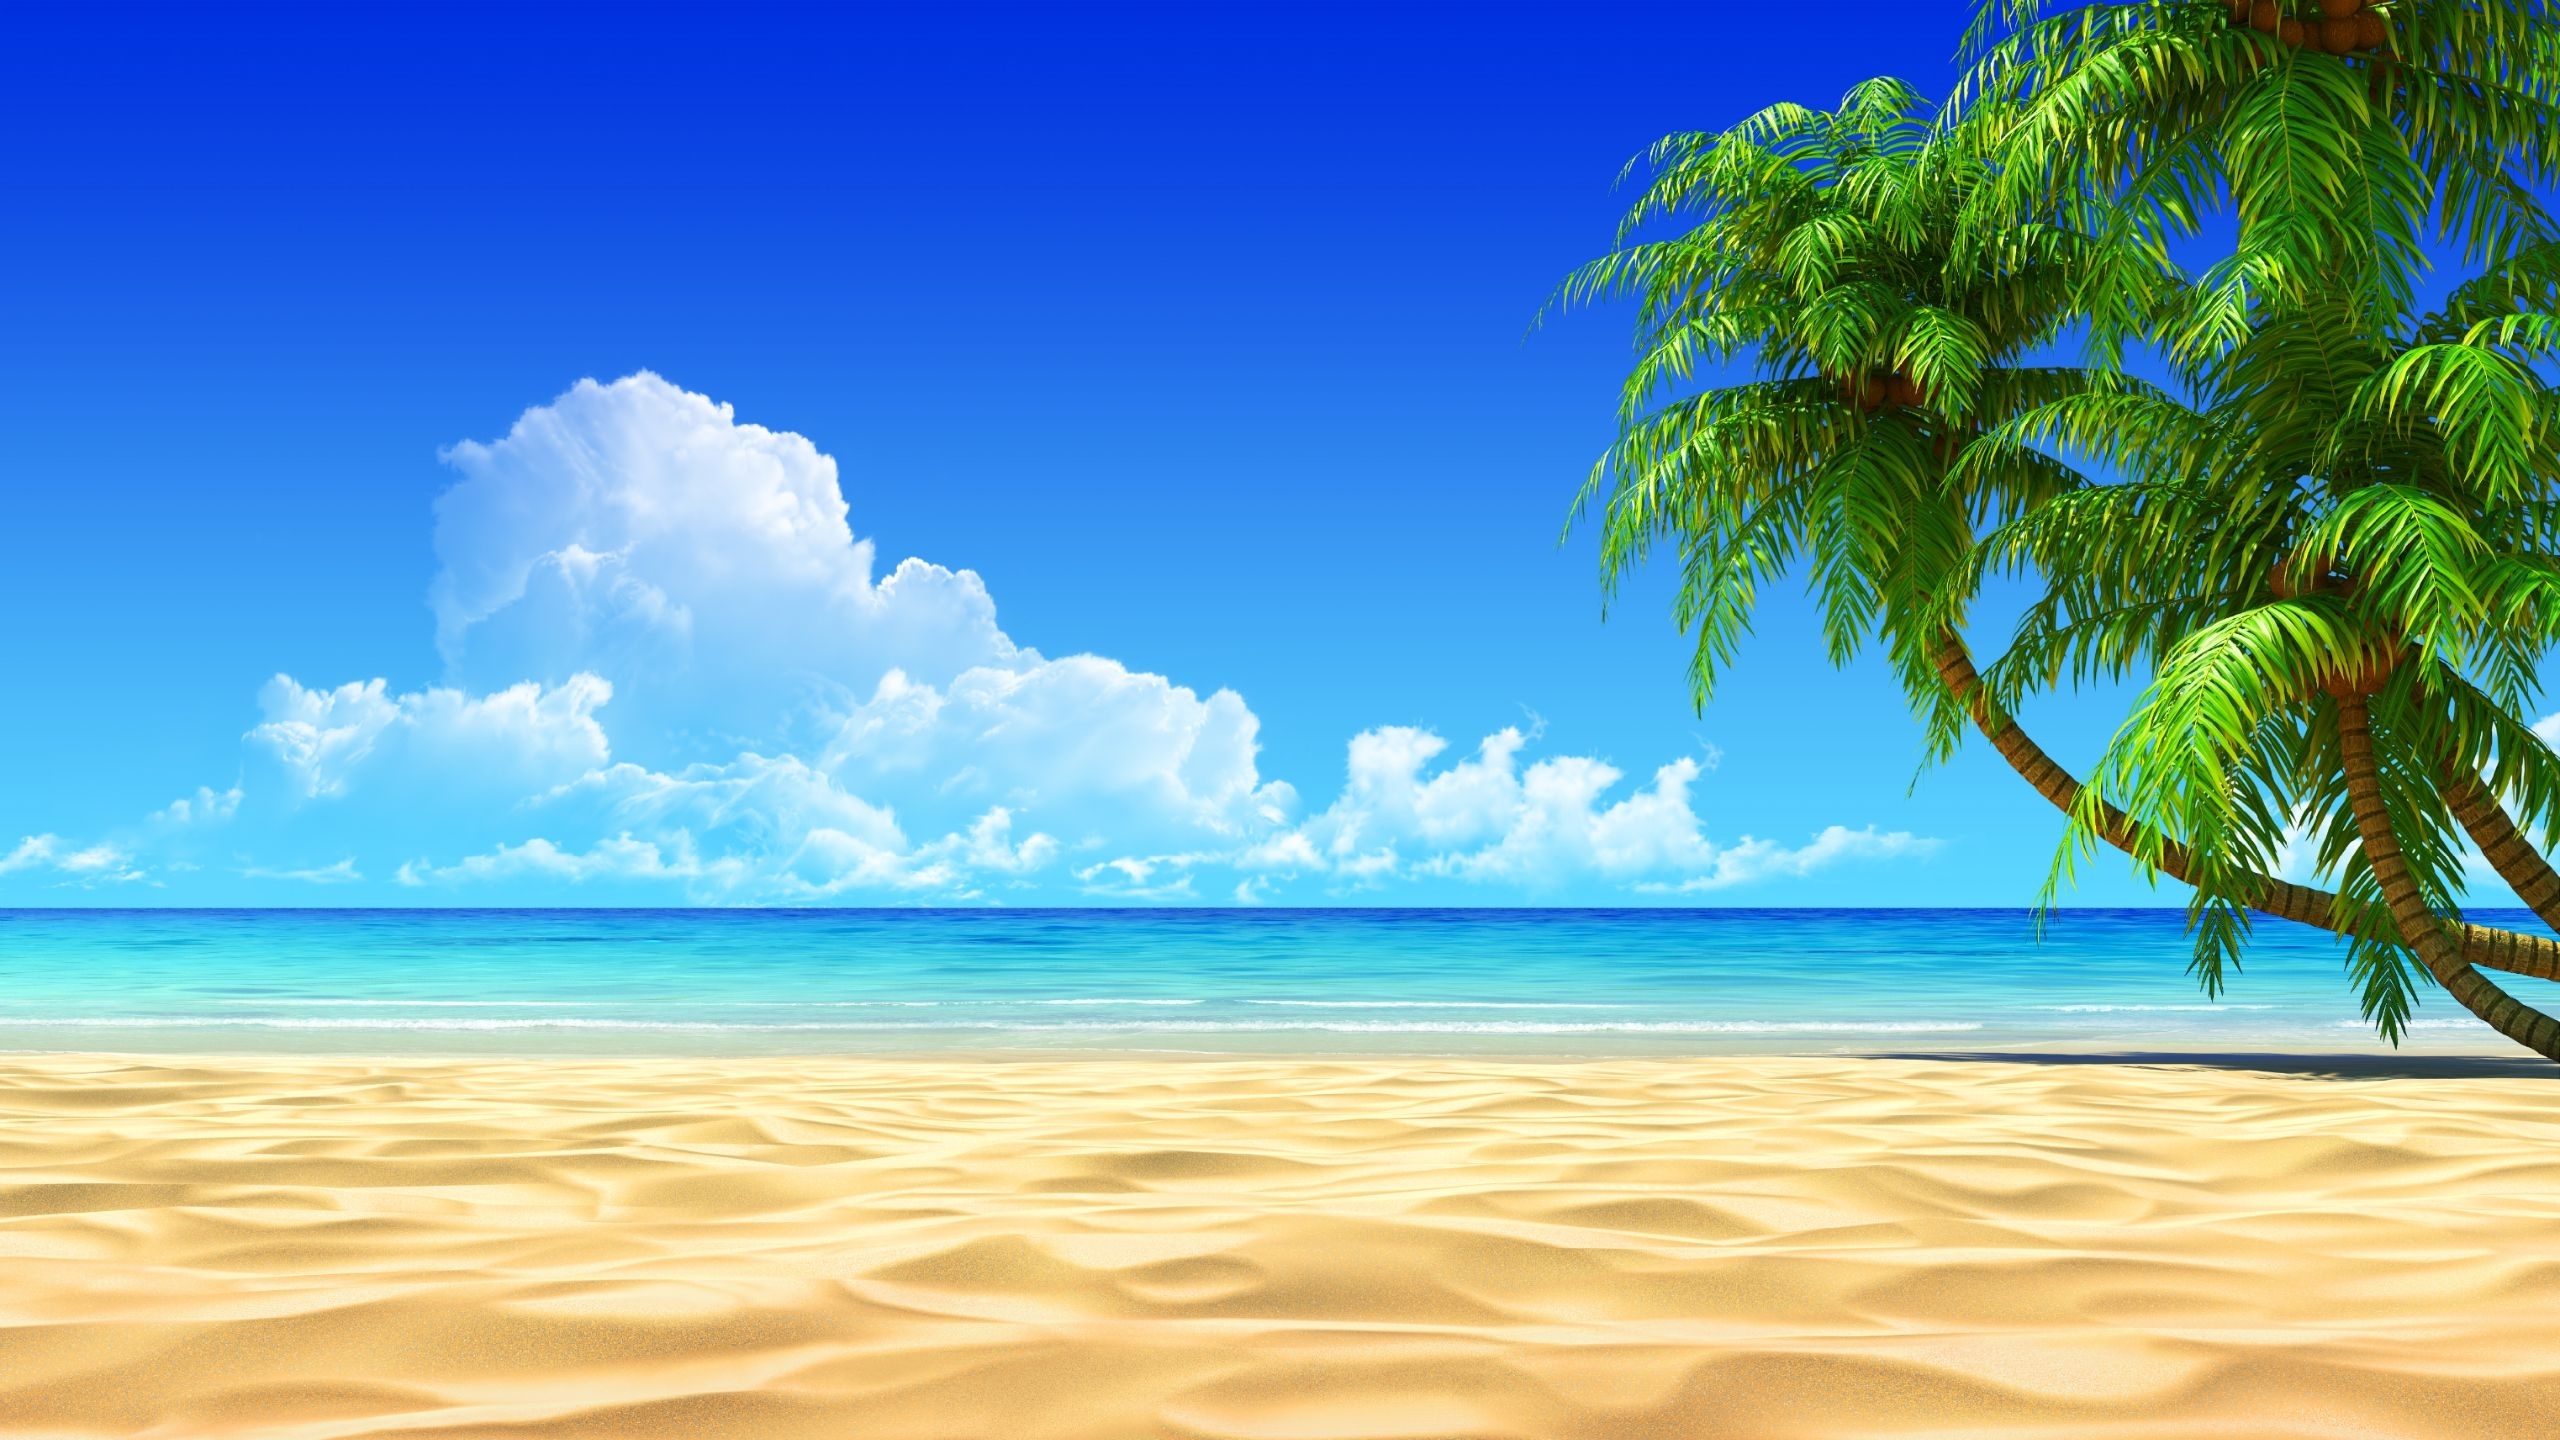 image for tropical beaches with palm trees wallpapers desktop